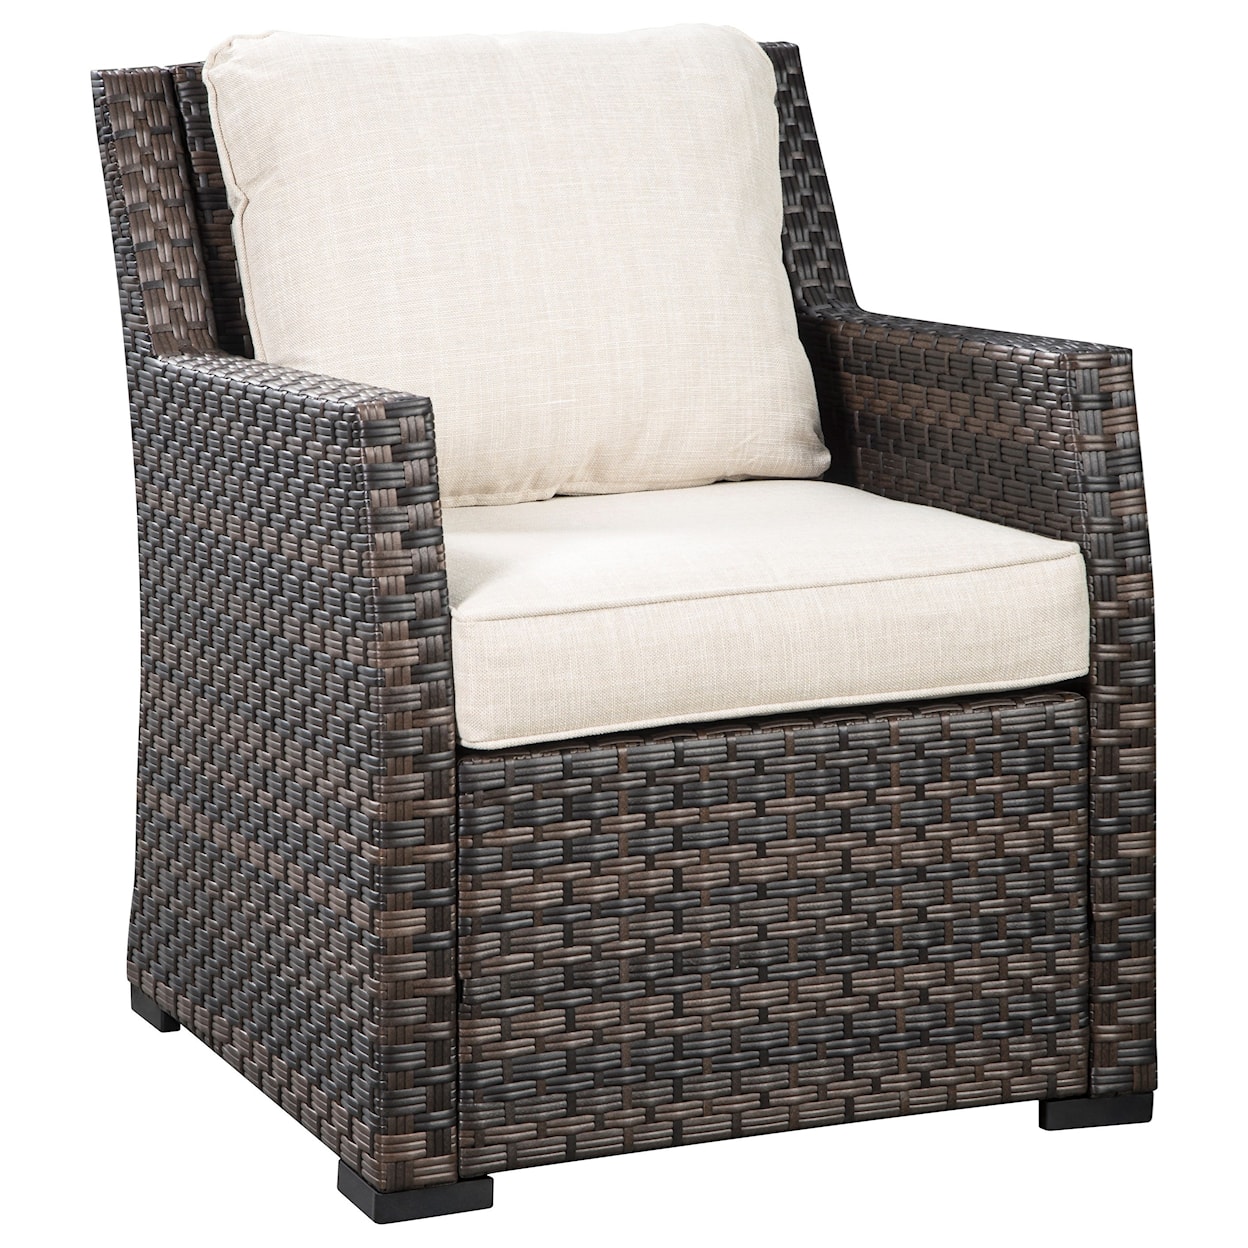 Signature Design by Ashley Easy Isle Outdoor 2-Piece Sectional & 2 Lounge Chairs